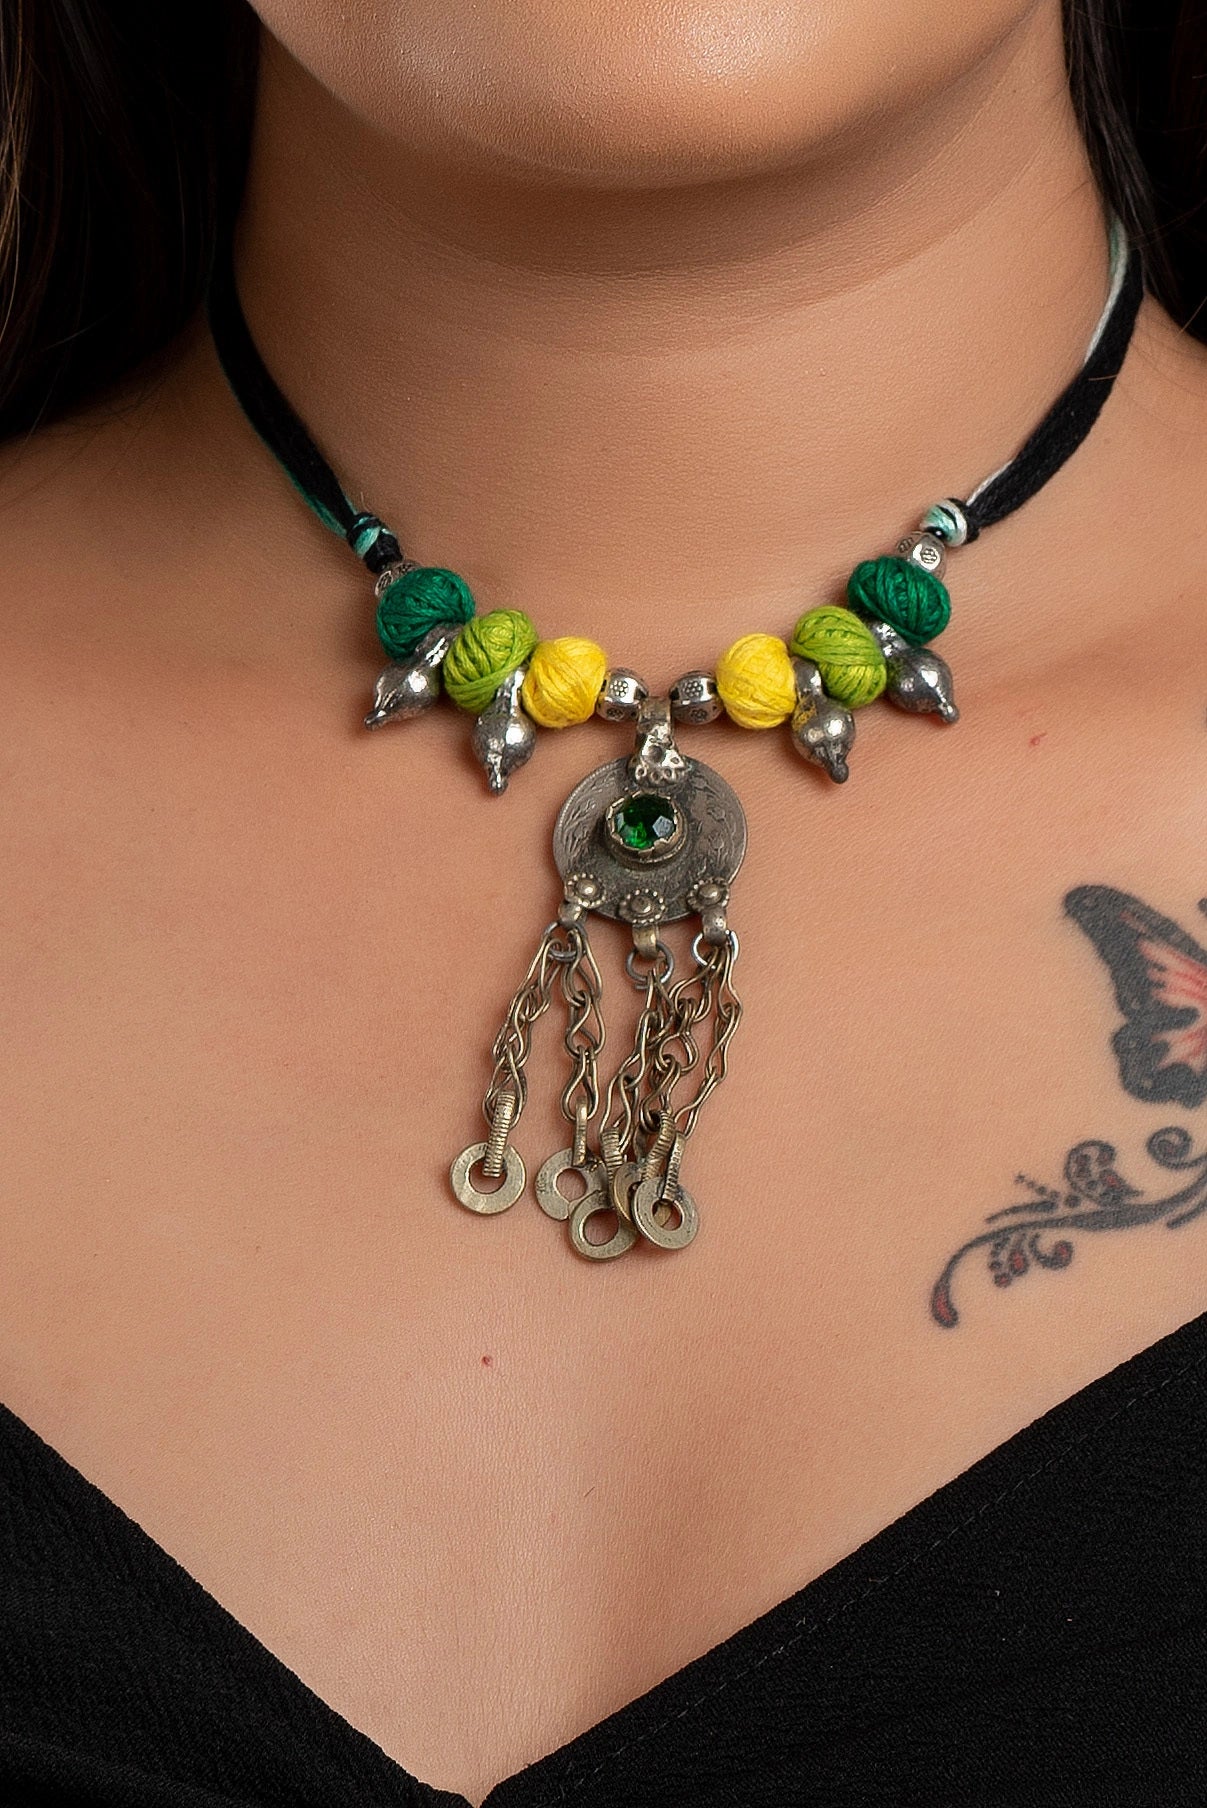 Authentic Afghan Coin Pendant Neckpiece with yellow green thread balls German silver beads and adjustable thread dori